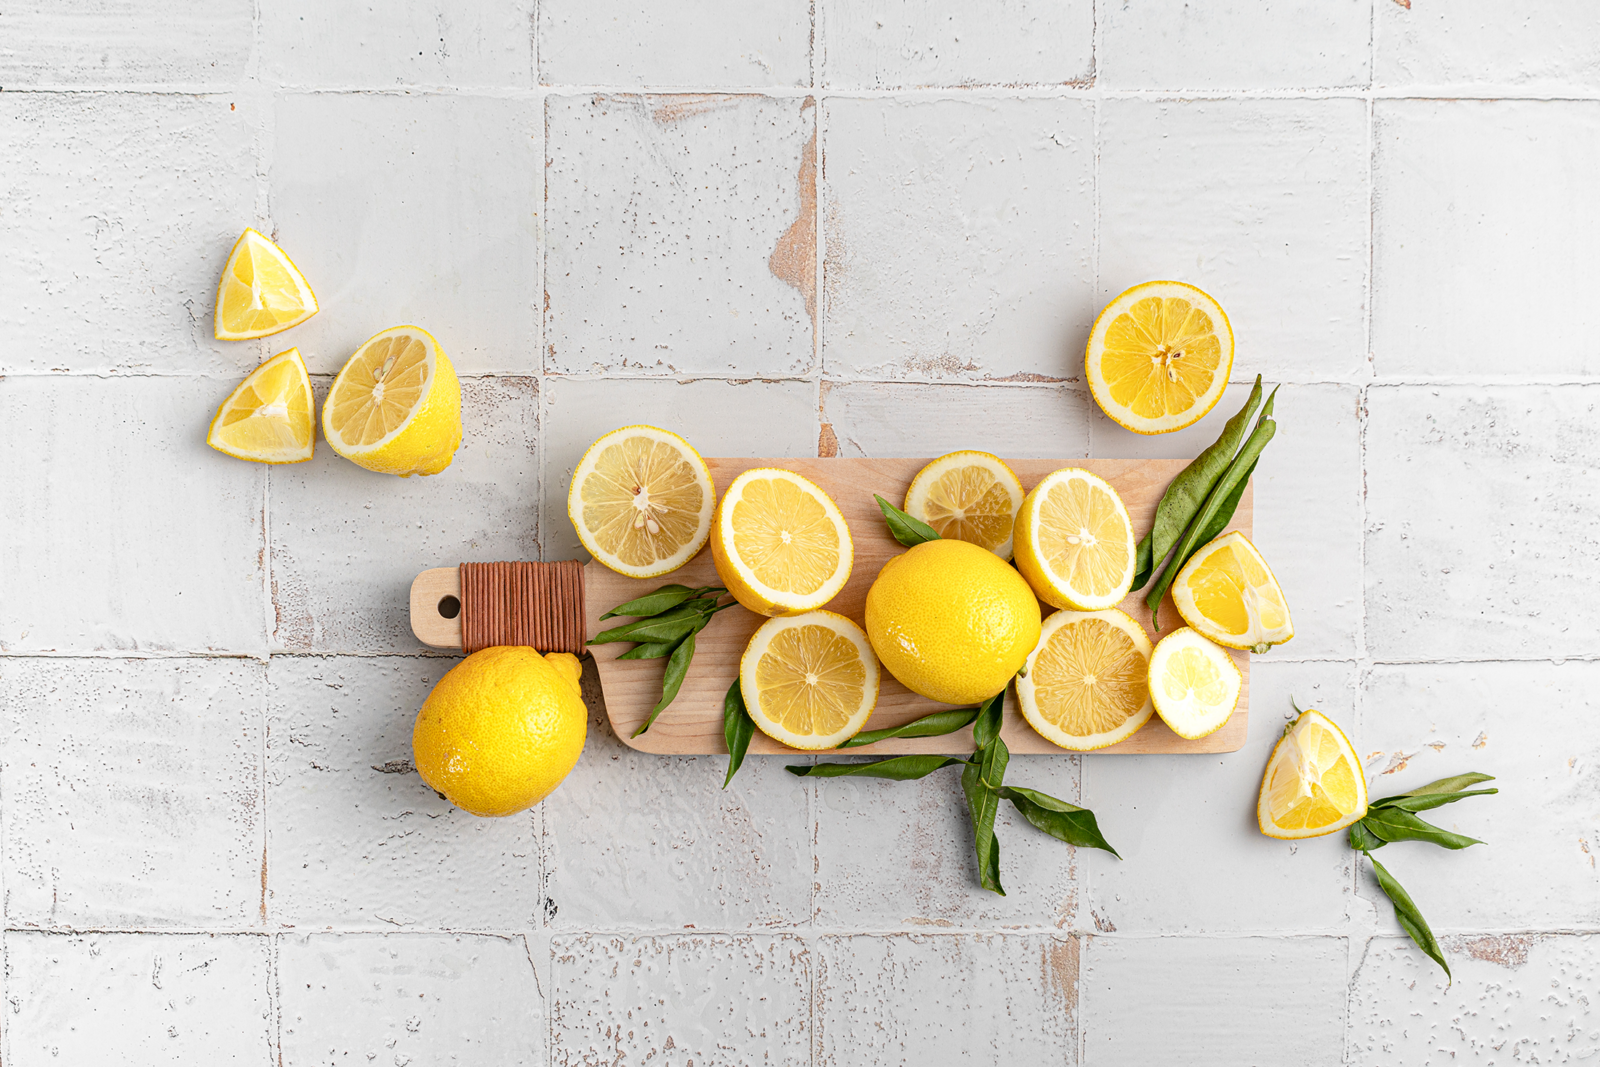 An assembly of entire and cut lemons on white background